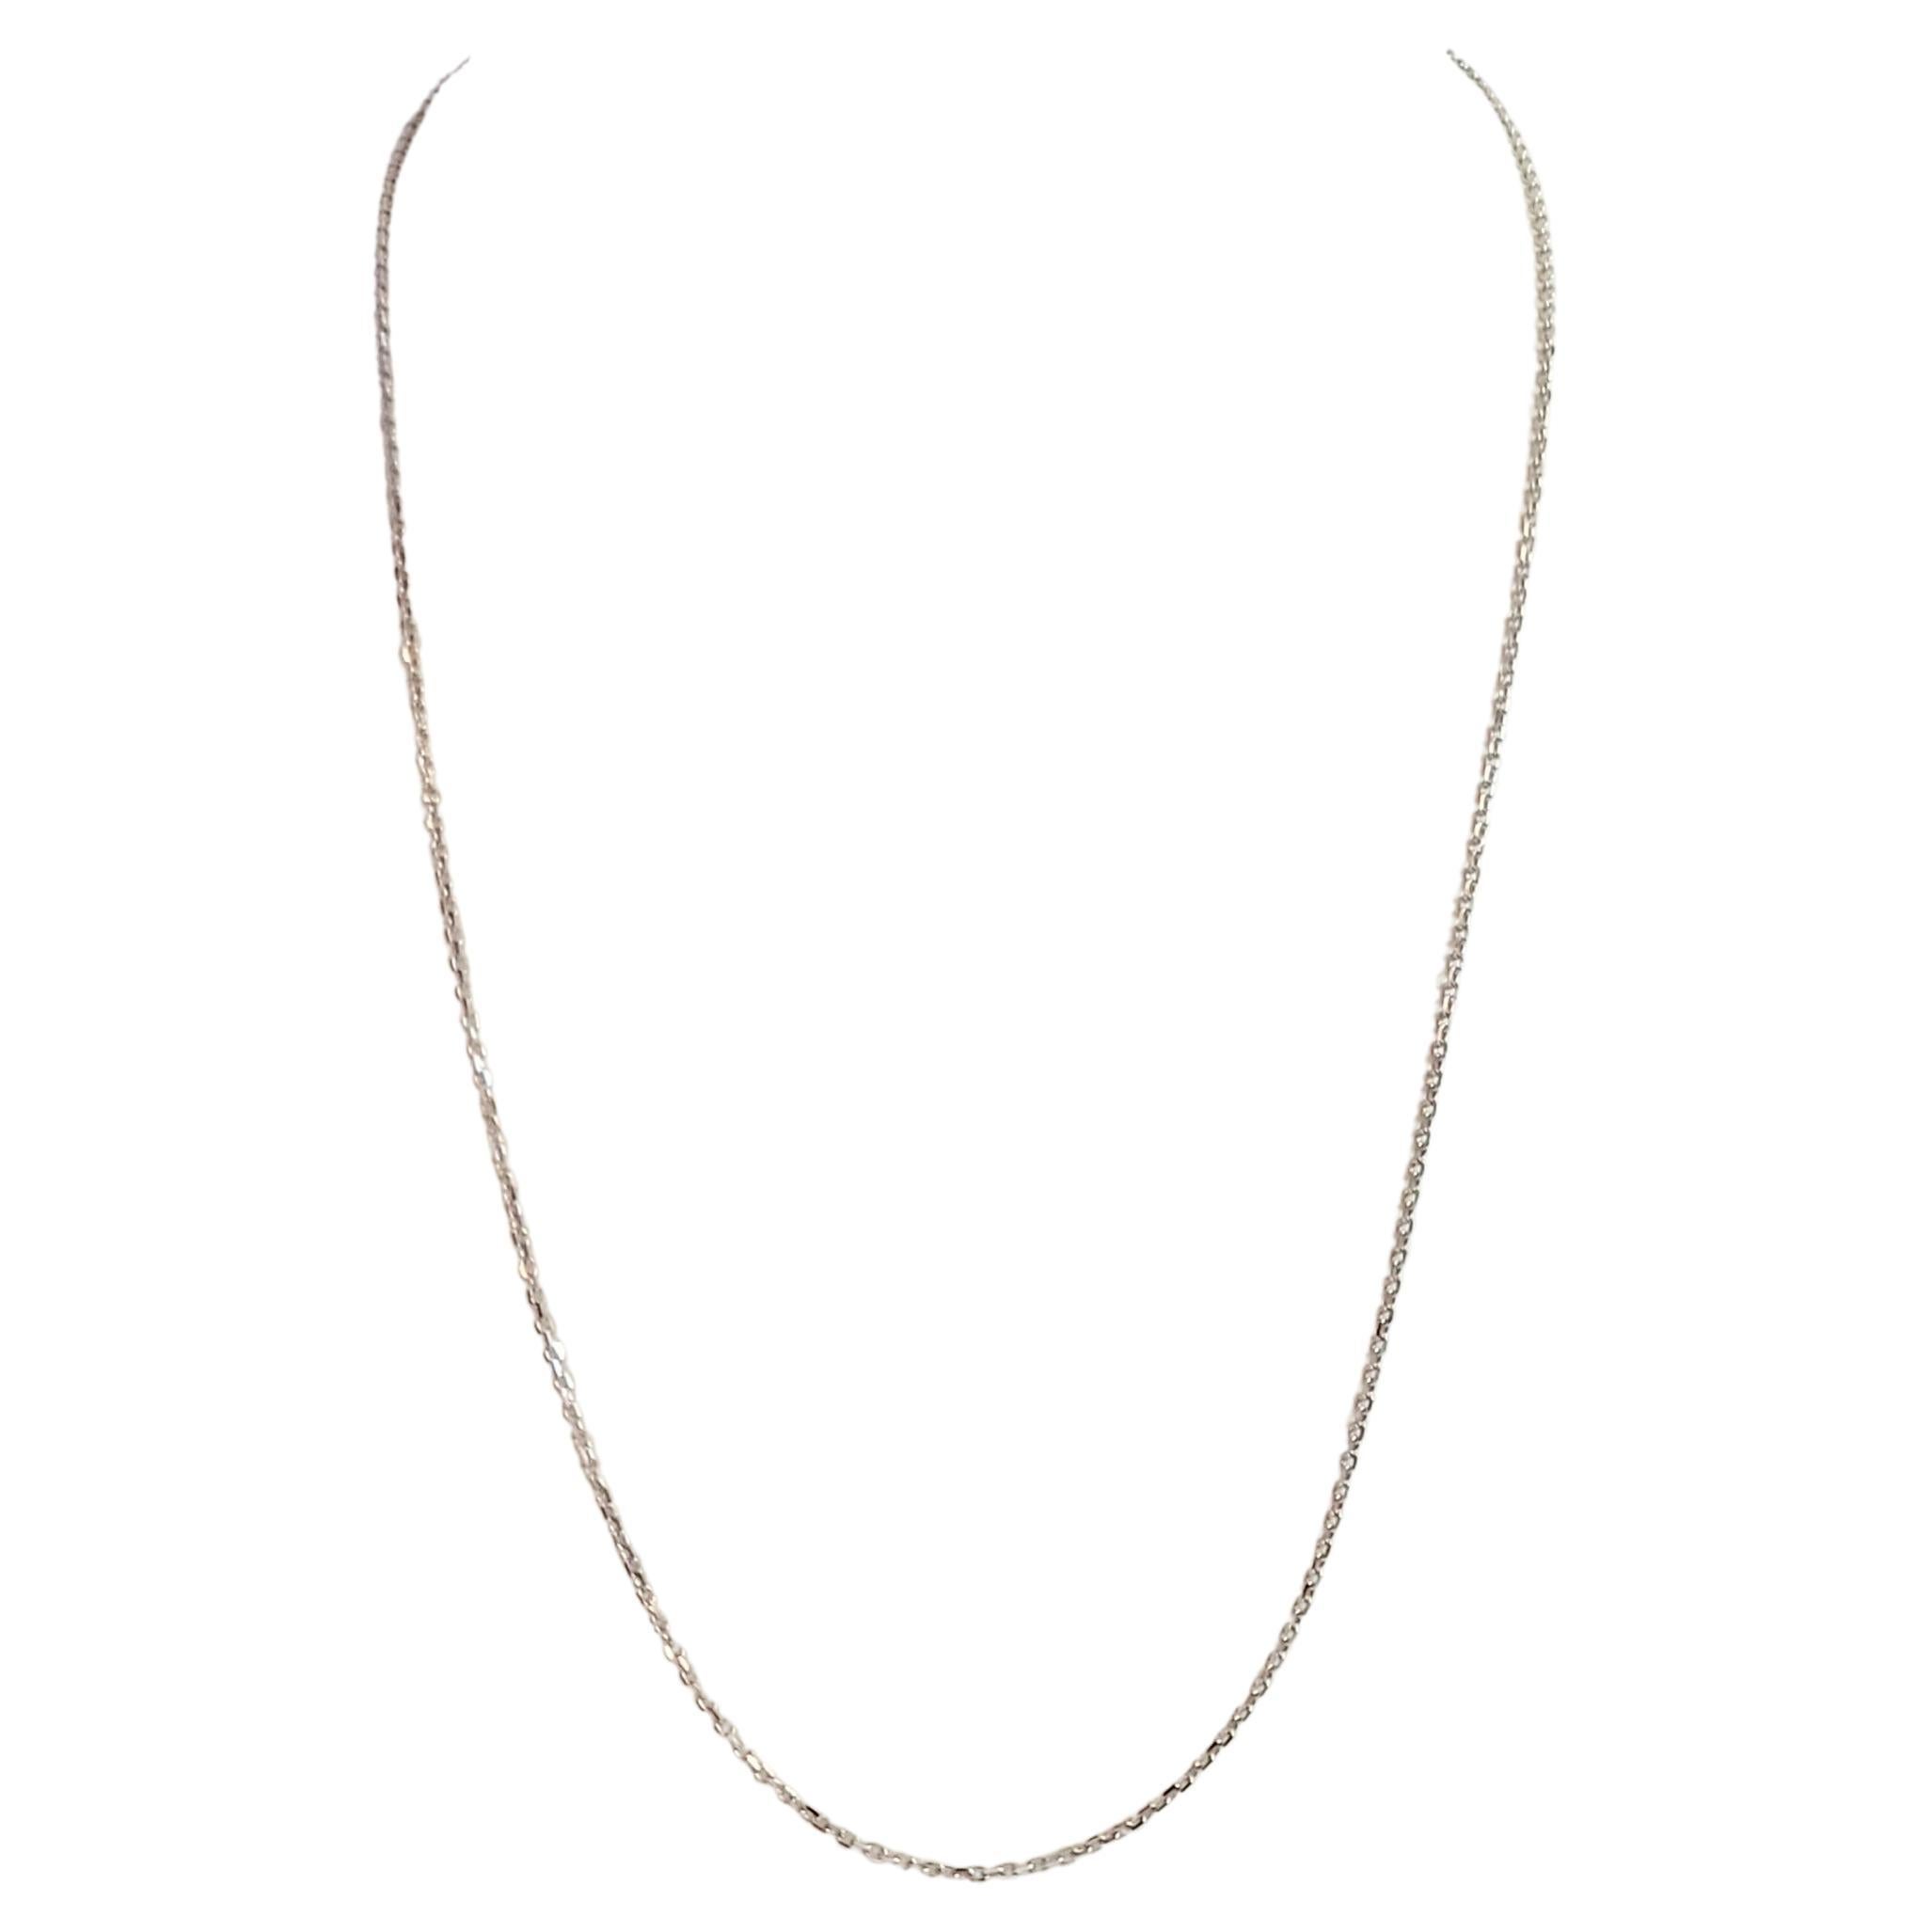 Tiffany & co PT950 Gold Chain 16" For Sale